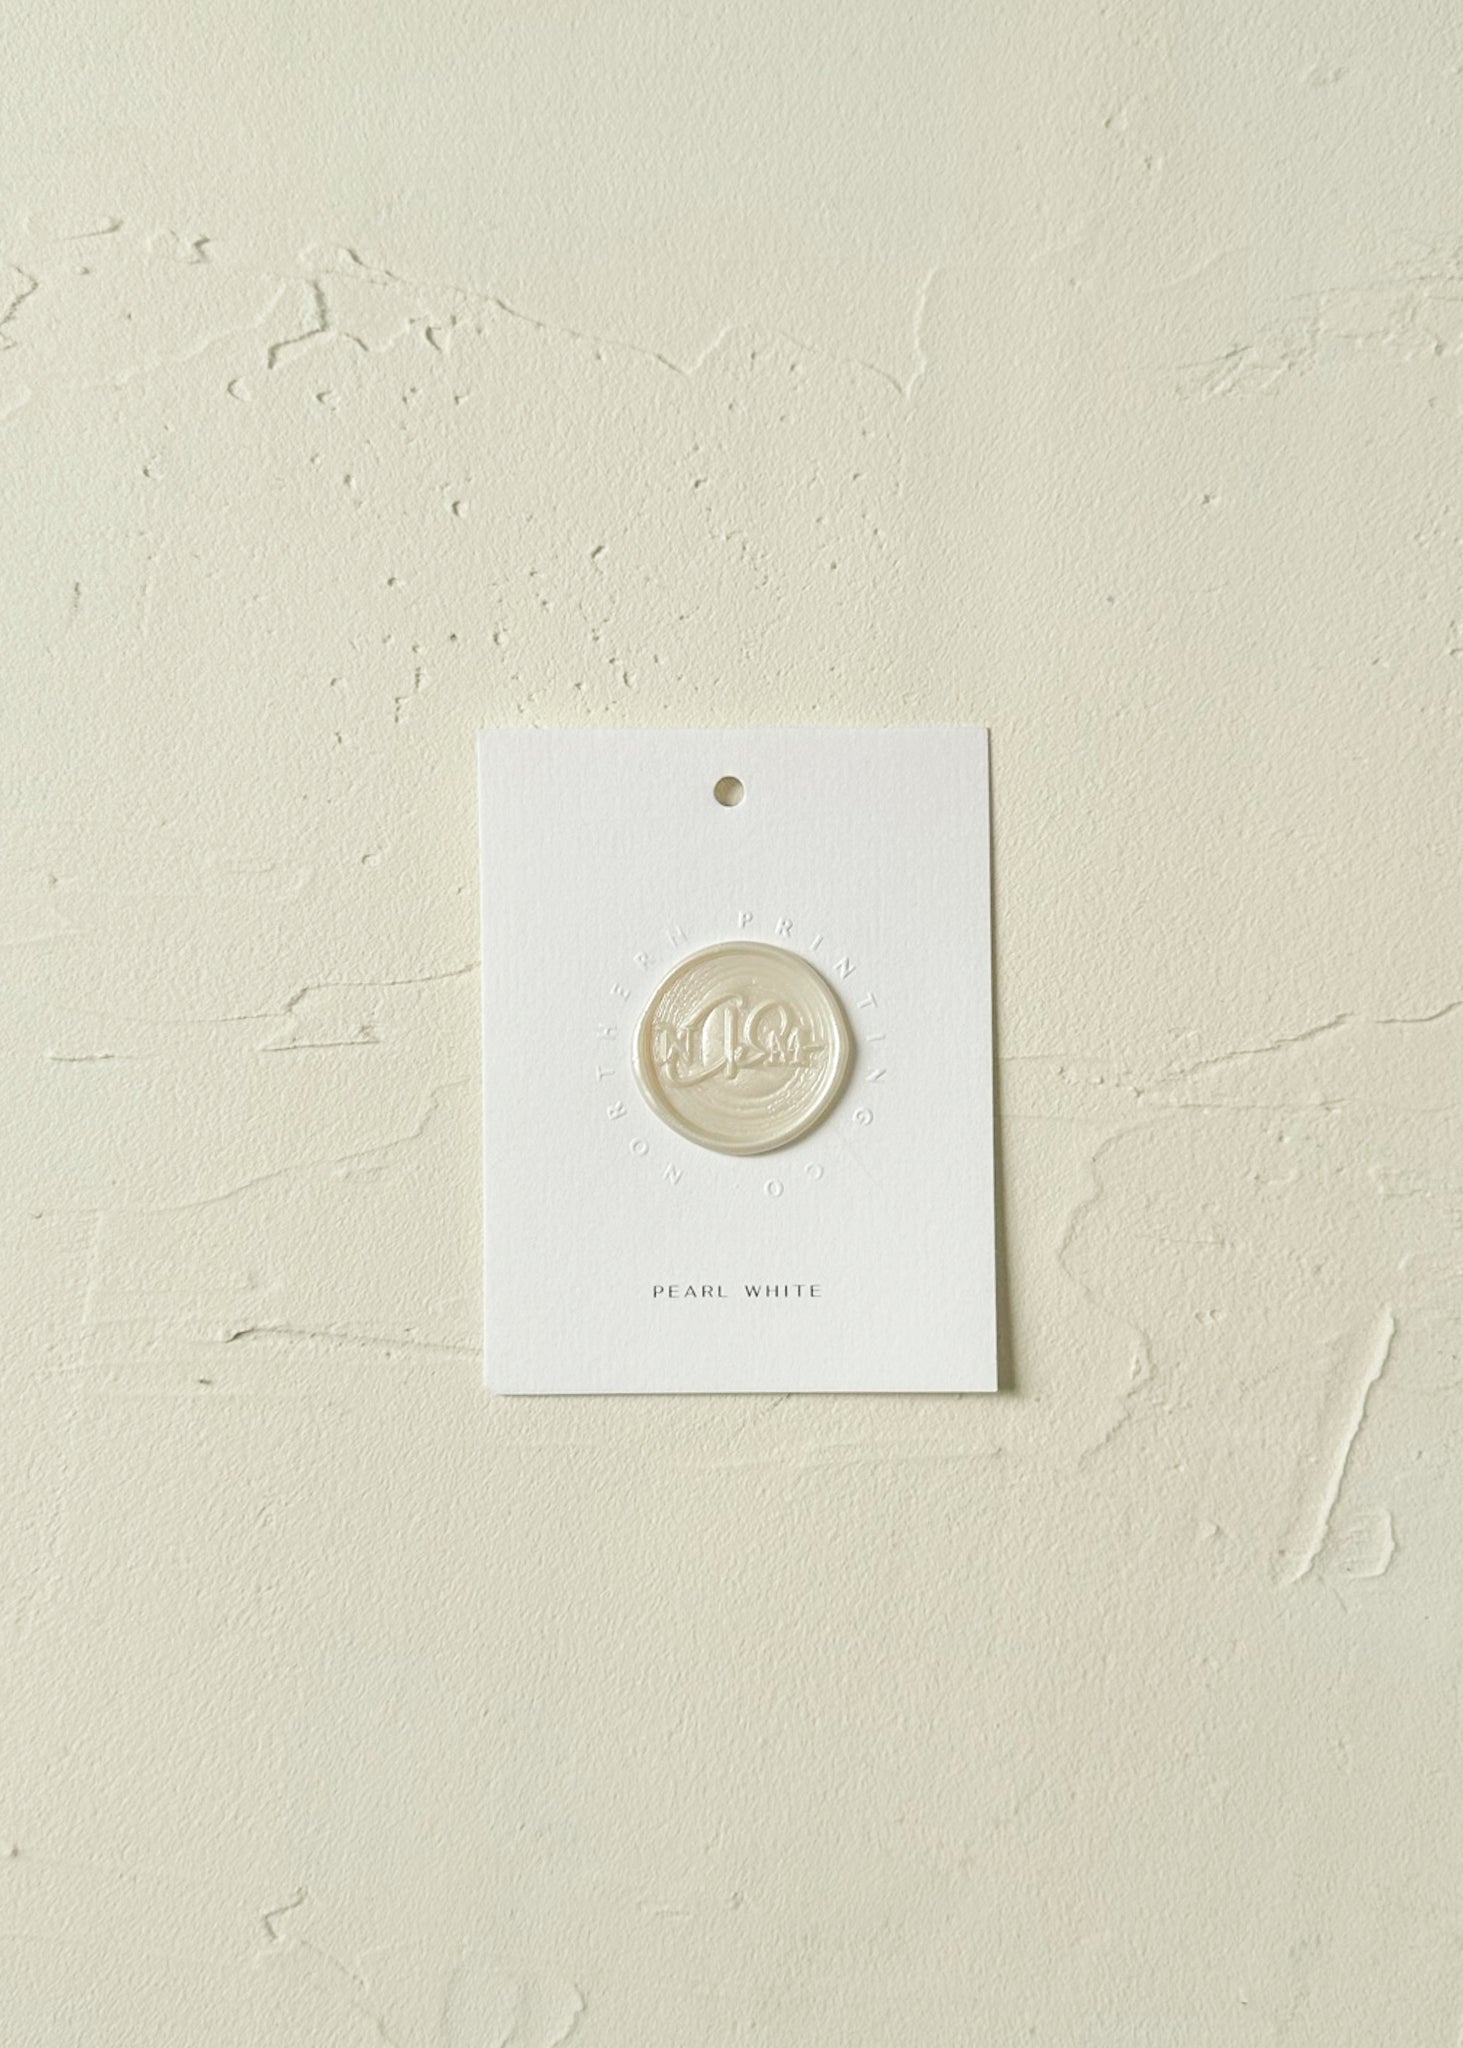 Elevated view of Pearl White wax seal stamp sample on textured background